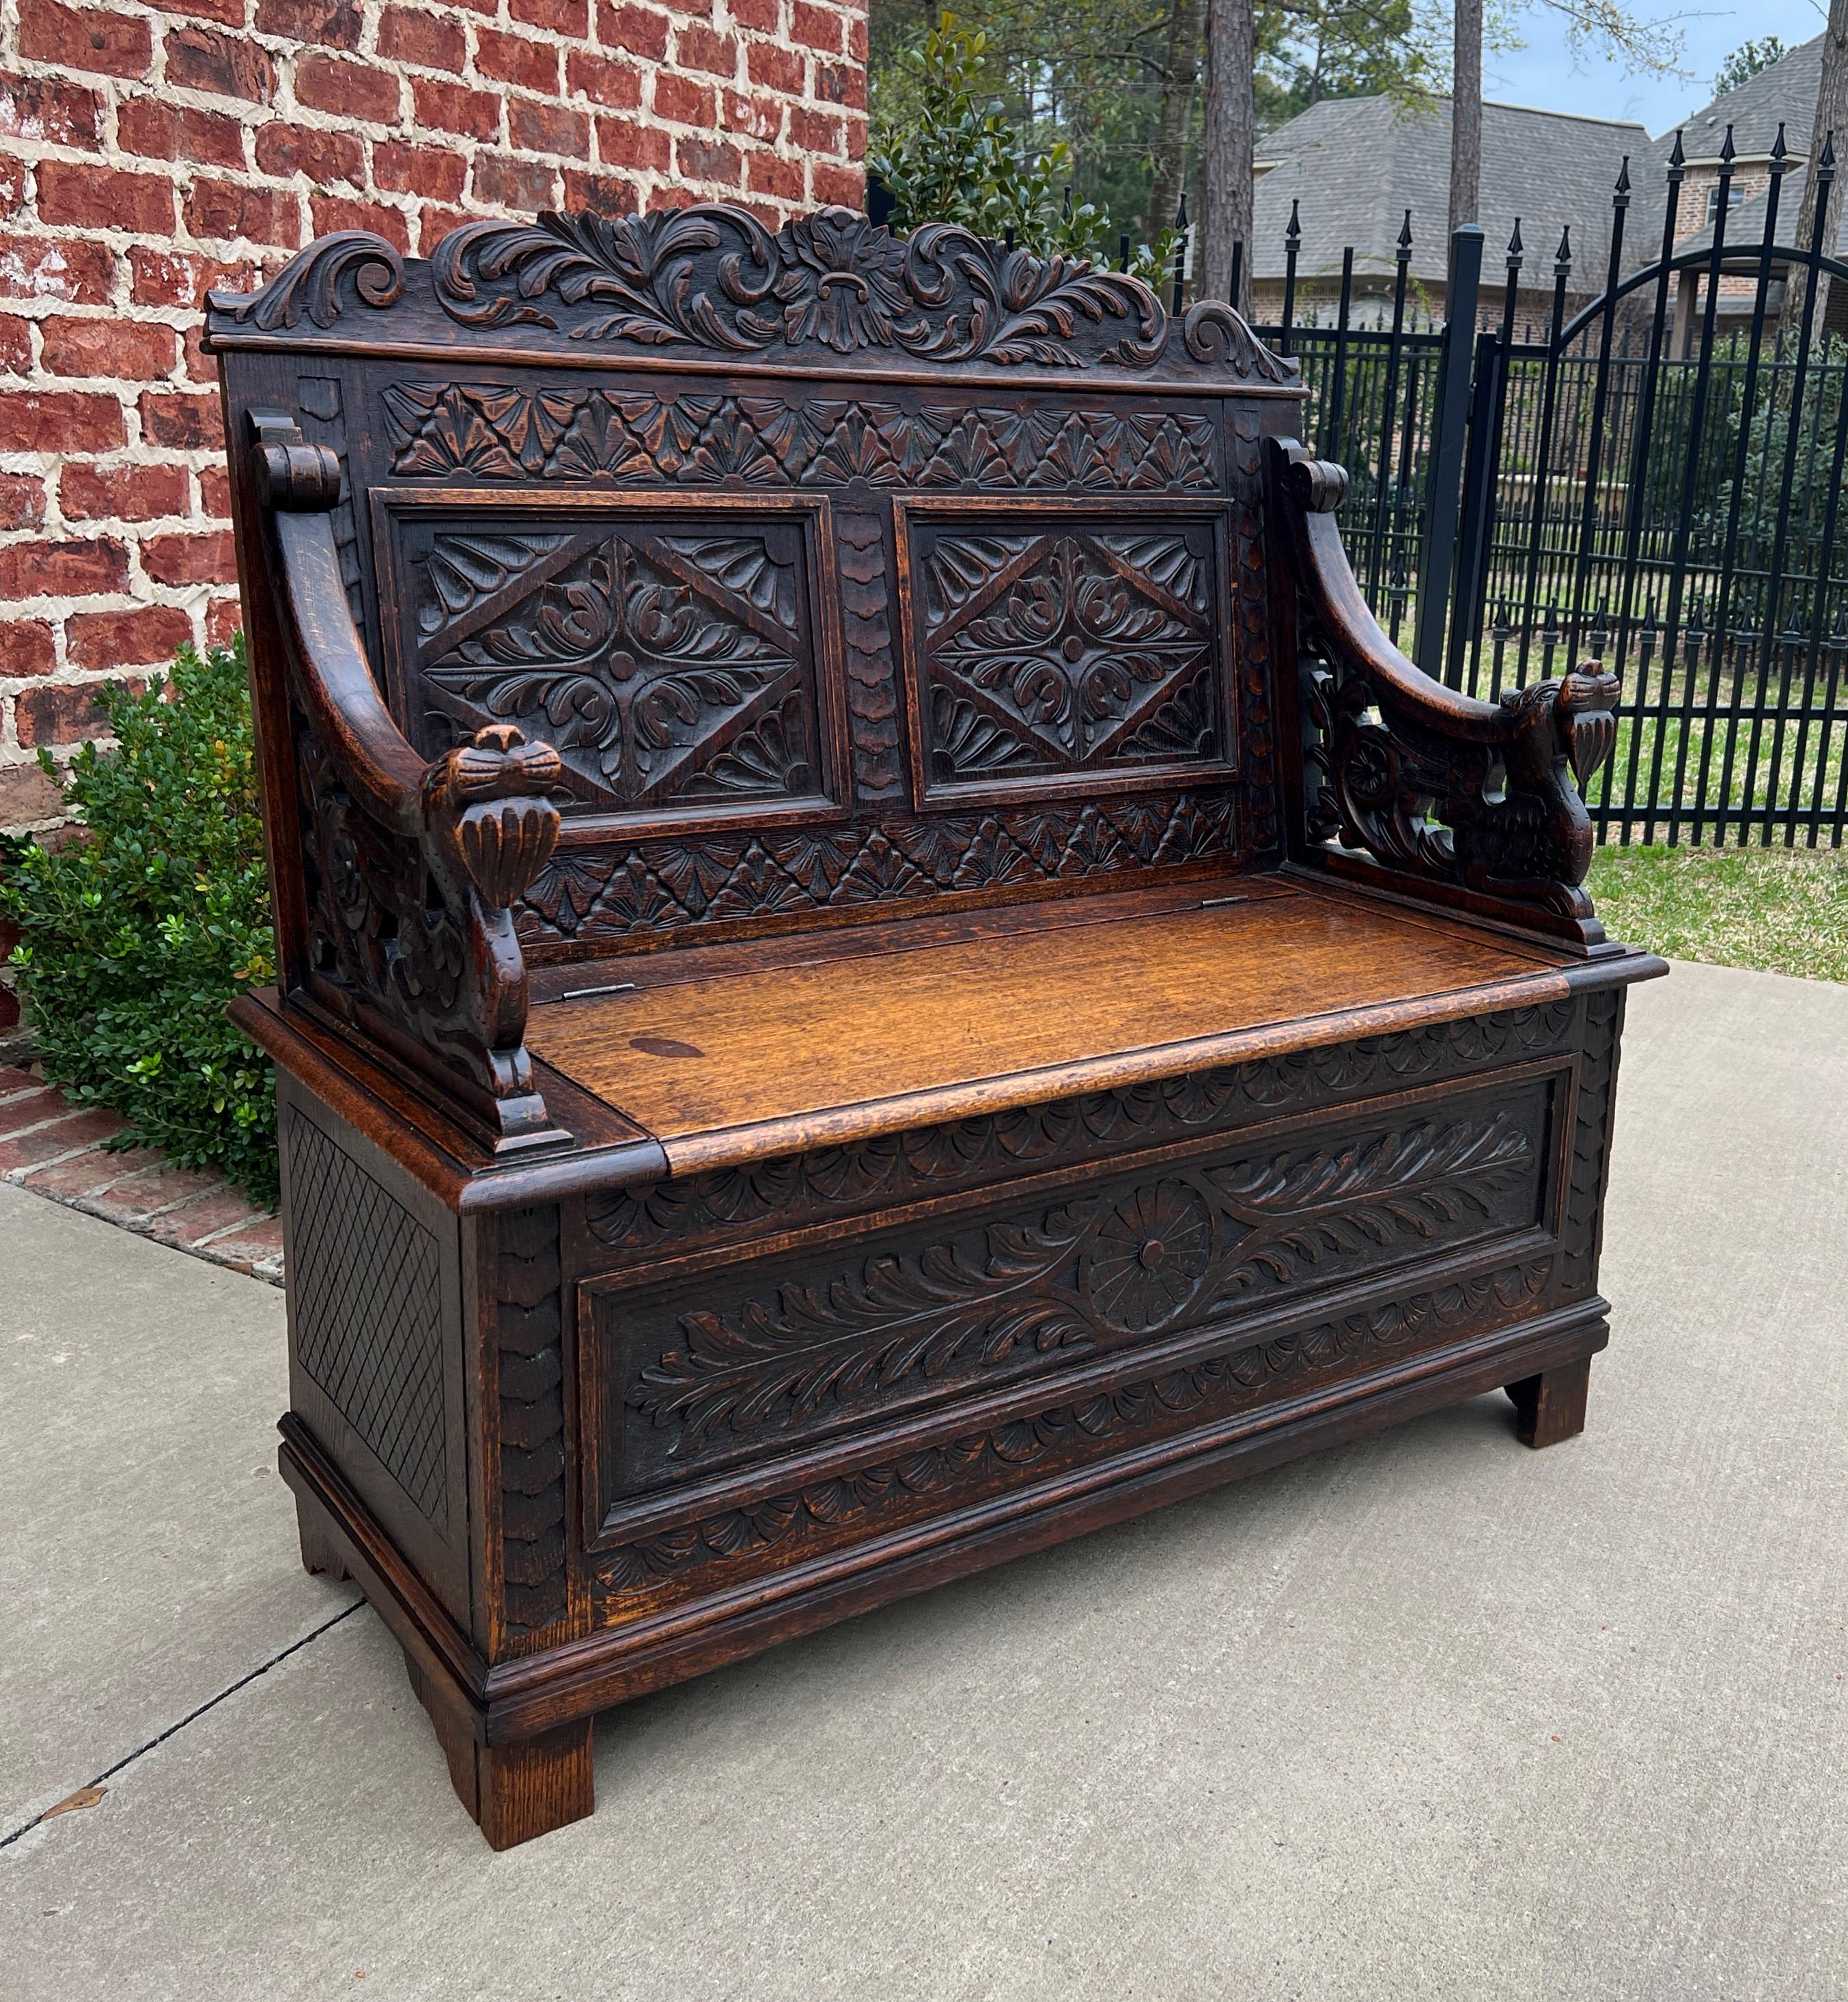 Carved Antique English Bench Chair Settee Hall Bench Renaissance Revival Oak Petite For Sale